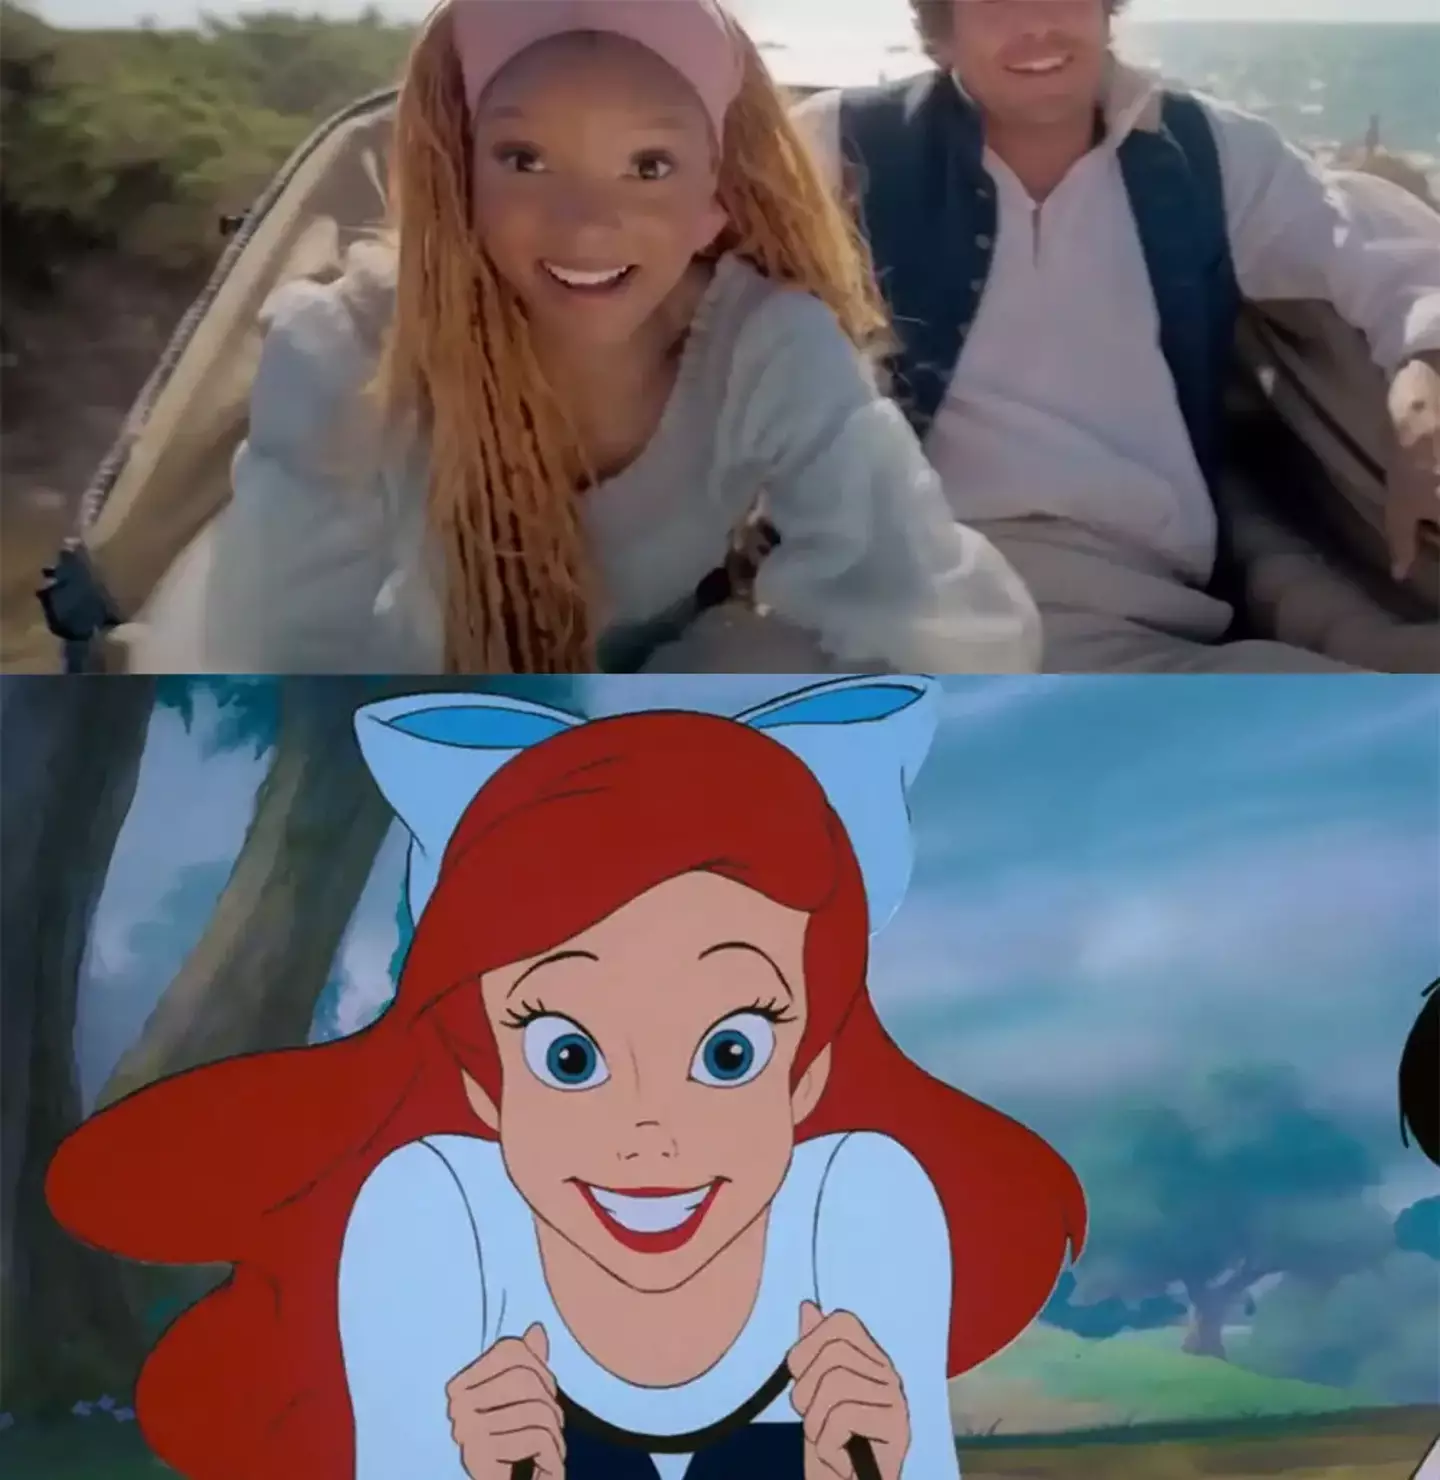 Ariel pictured at the reins of a carriage in both films, spare a thought for the pedestrians.